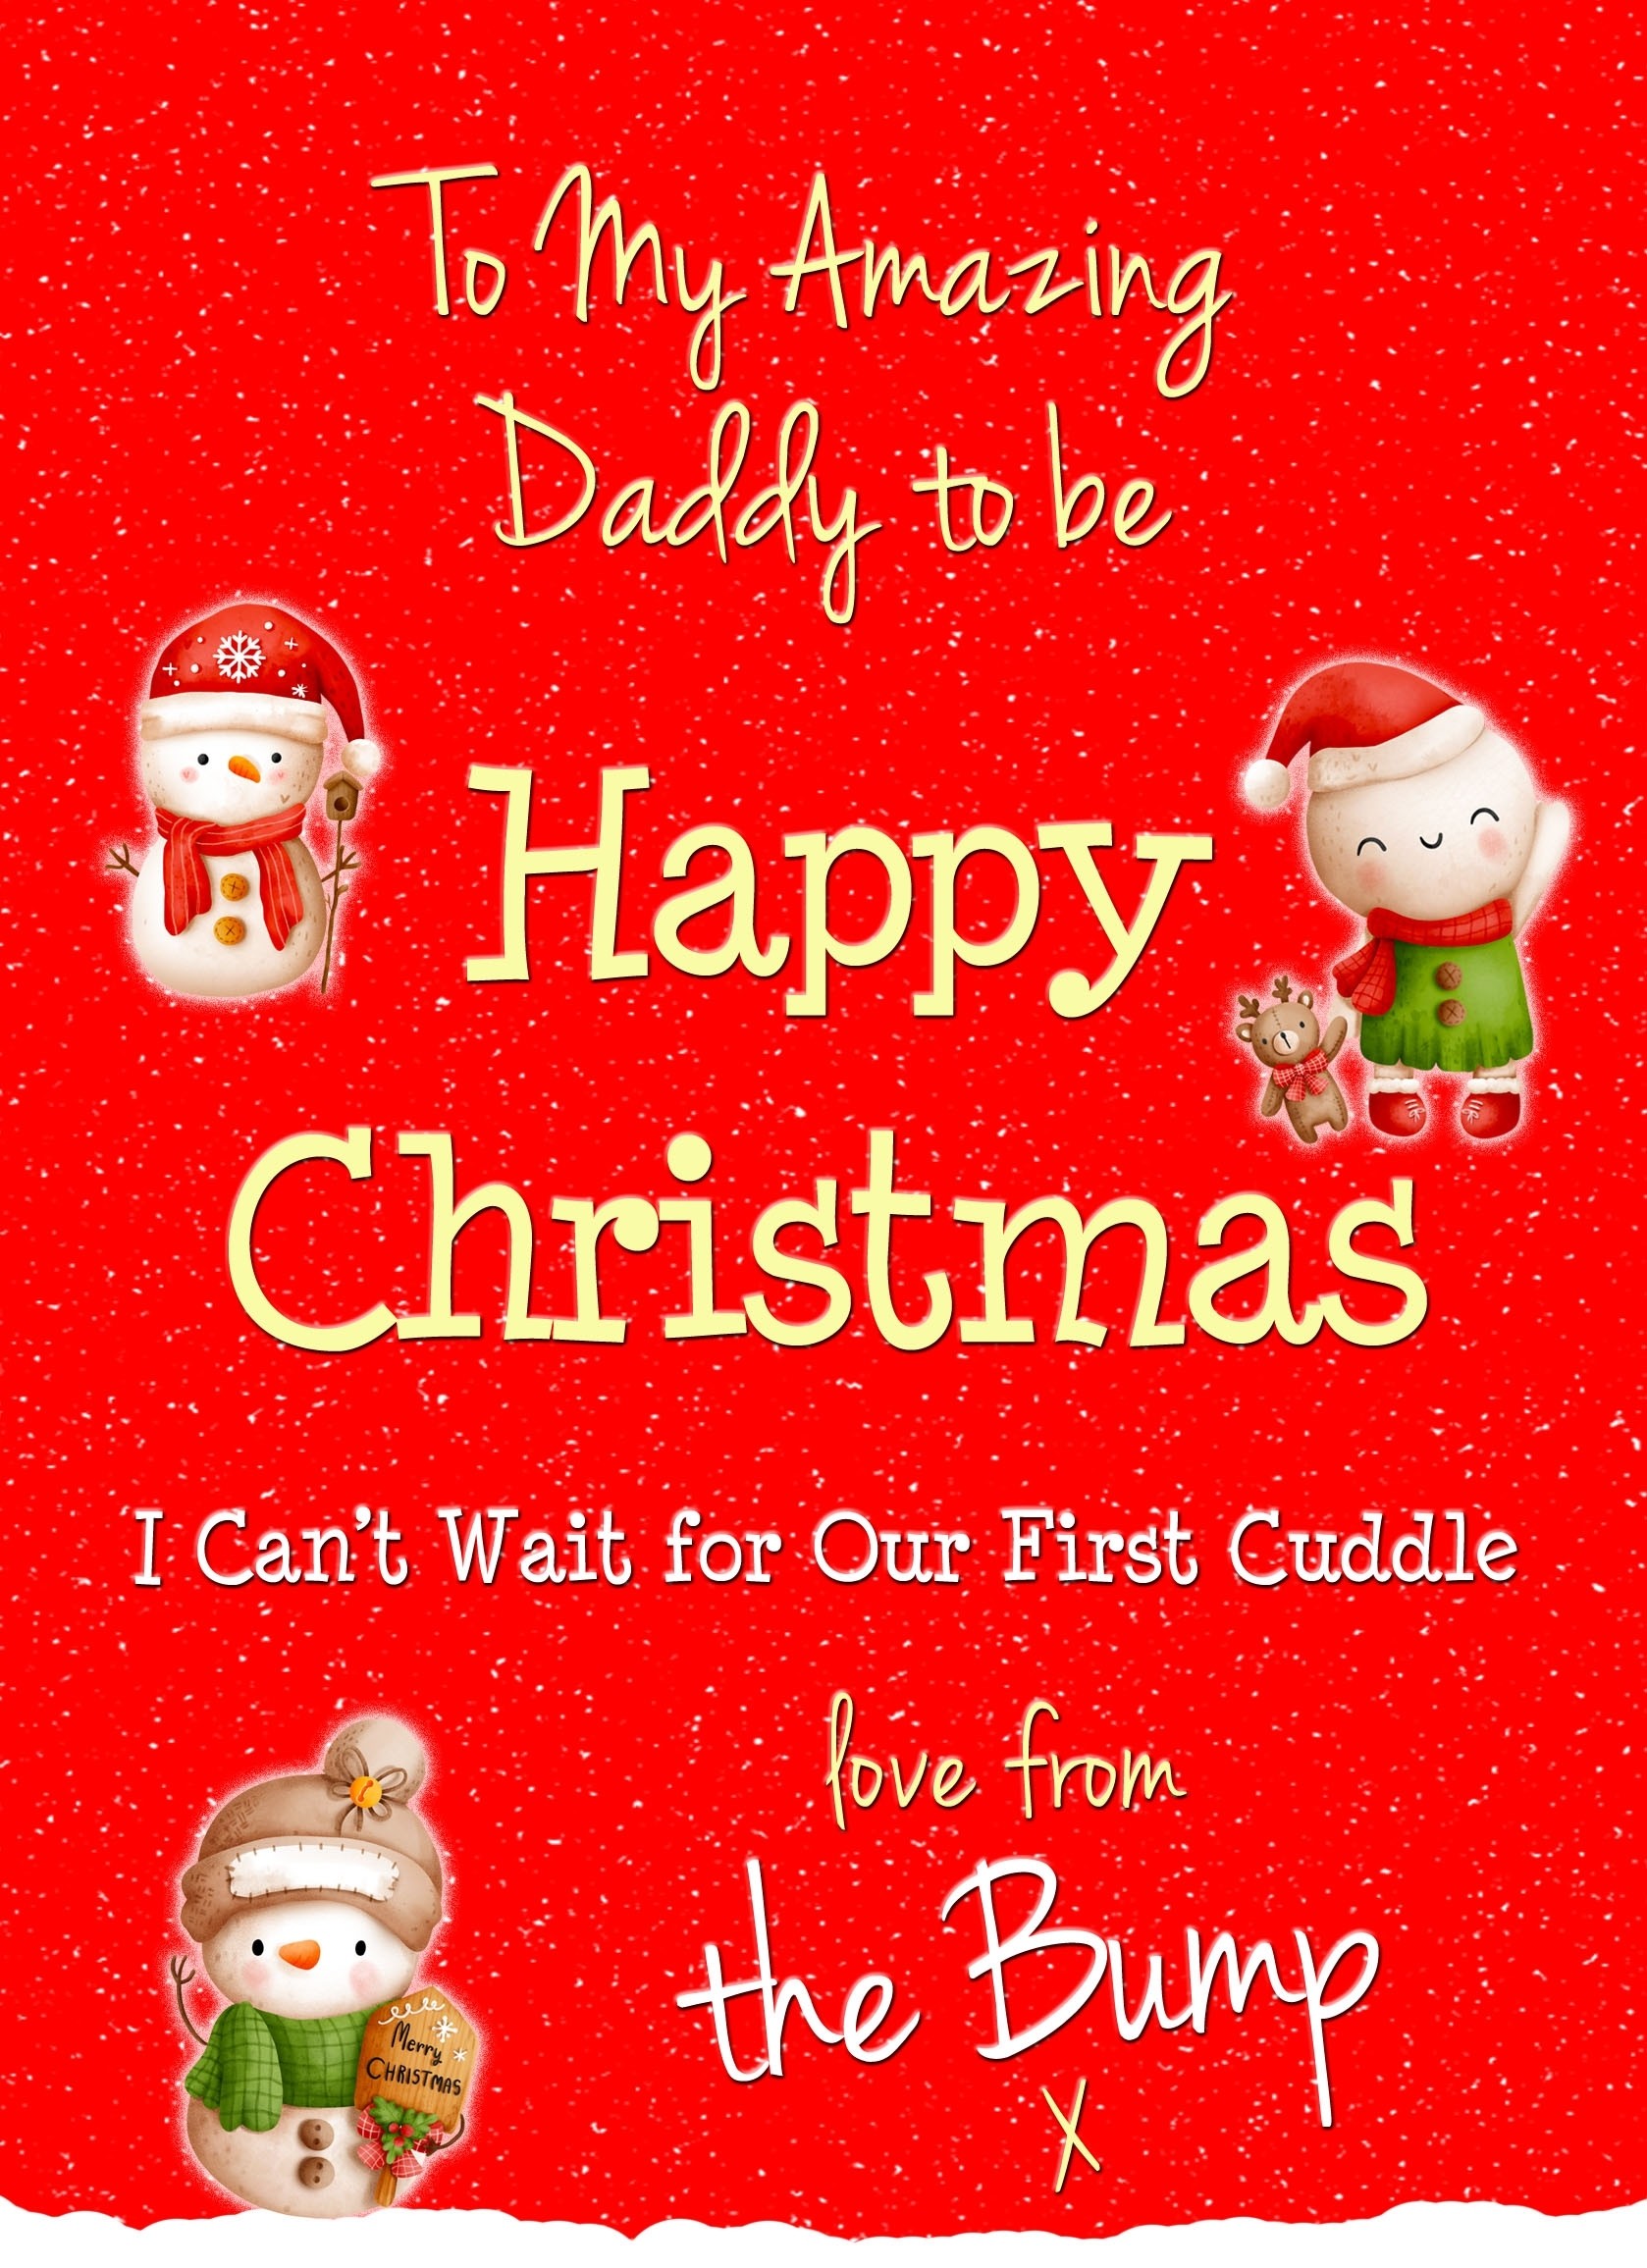 From The Bump Pregnancy Christmas Card (Daddy)